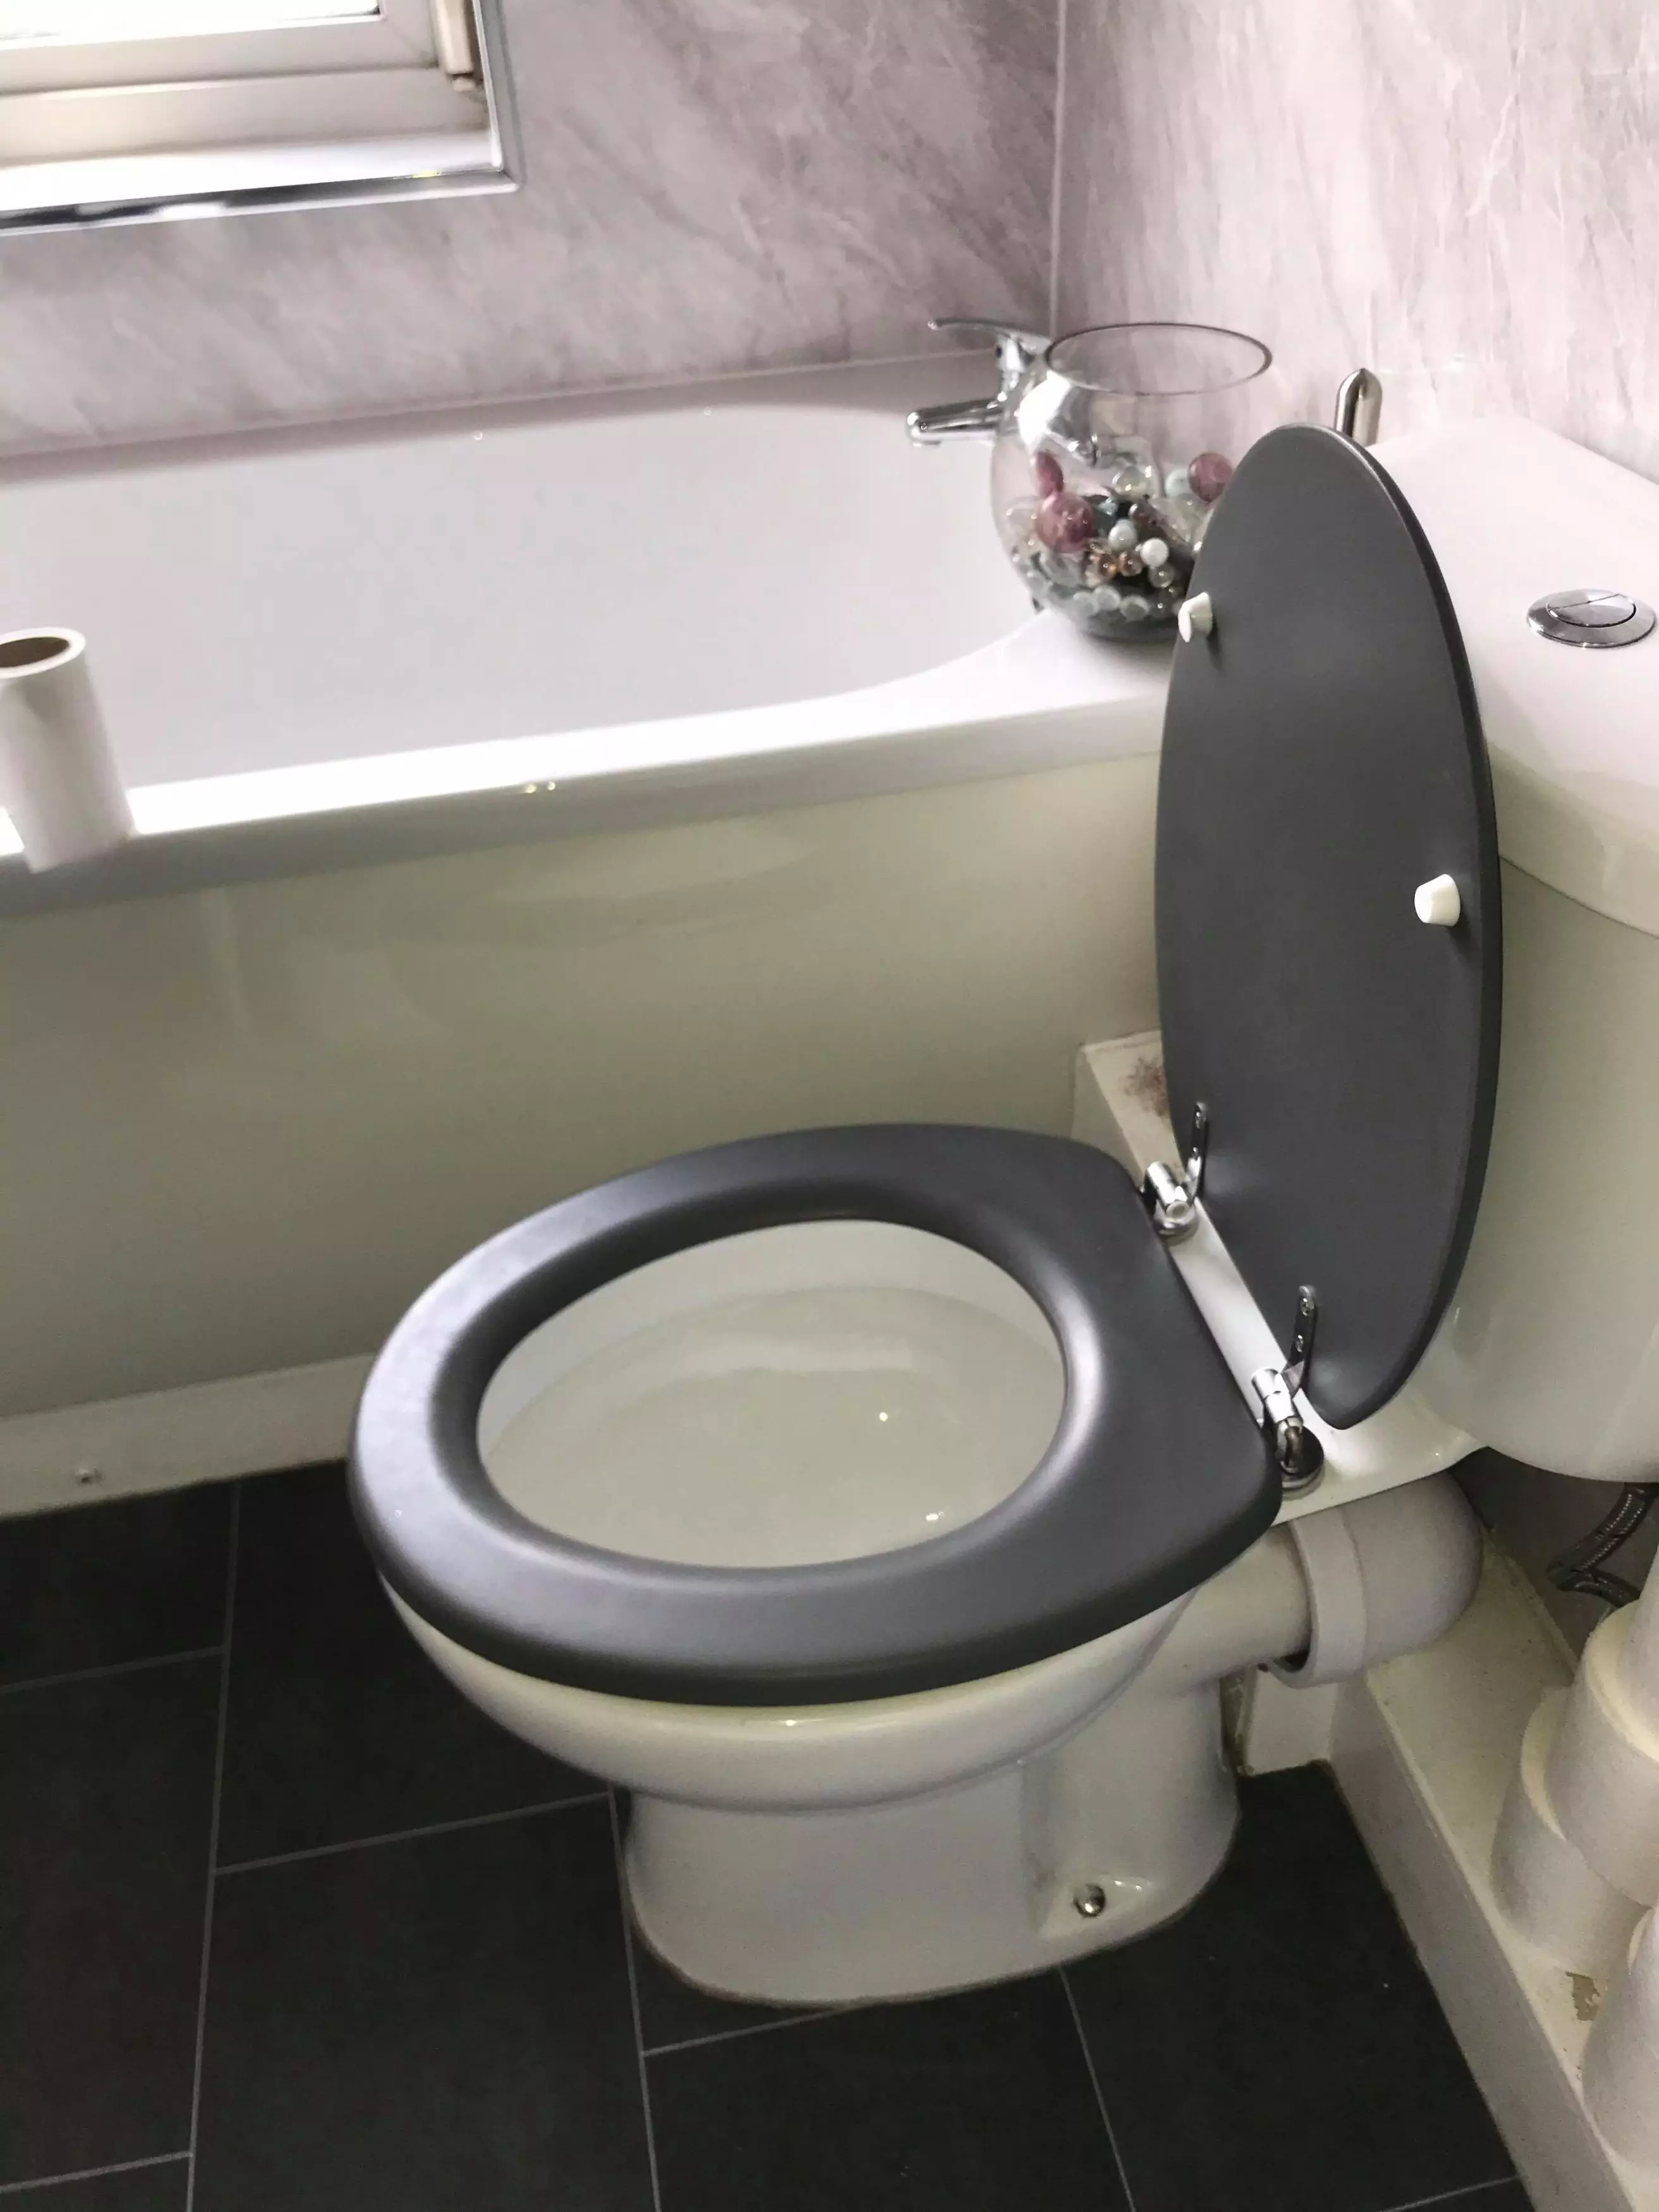 Kirsty couldn't believe someone had used her toilet while she was asleep (